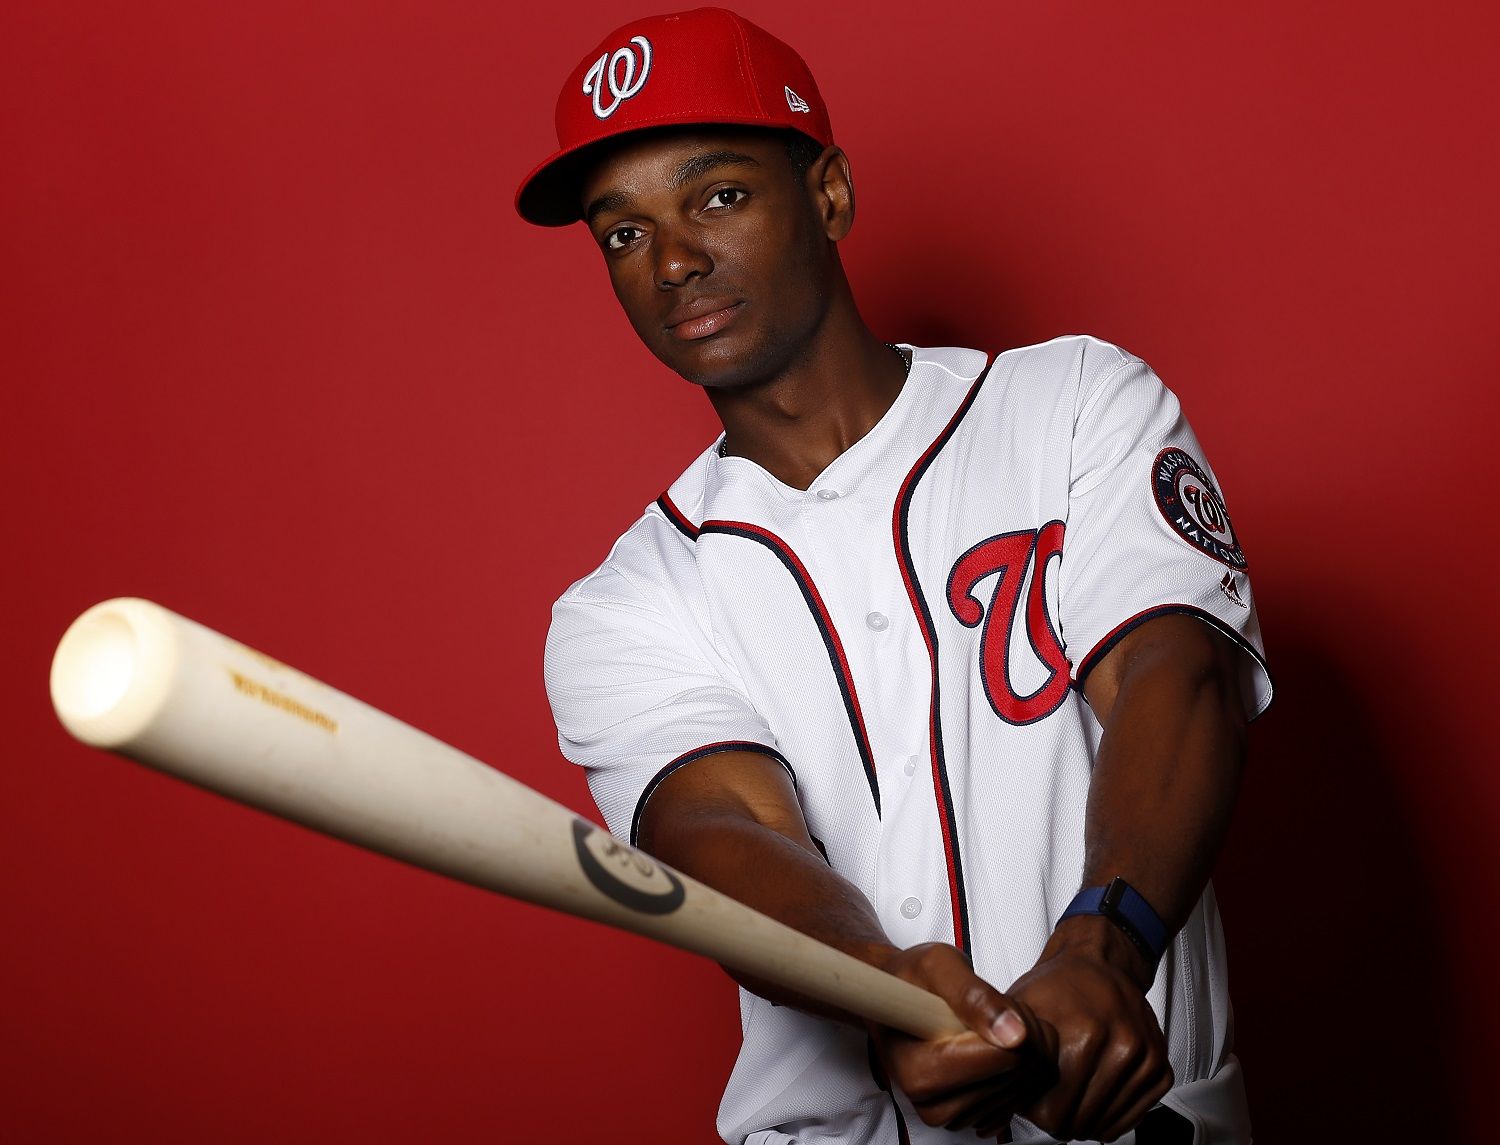 WEST PALM BEACH, FLORIDA - FEBRUARY 22:  Michael Taylor #3 of the Washington Nationals poses for a portrait on Photo Day at FITTEAM Ballpark of The Palm Beaches during on February 22, 2019 in West Palm Beach, Florida. (Photo by Michael Reaves/Getty Images)